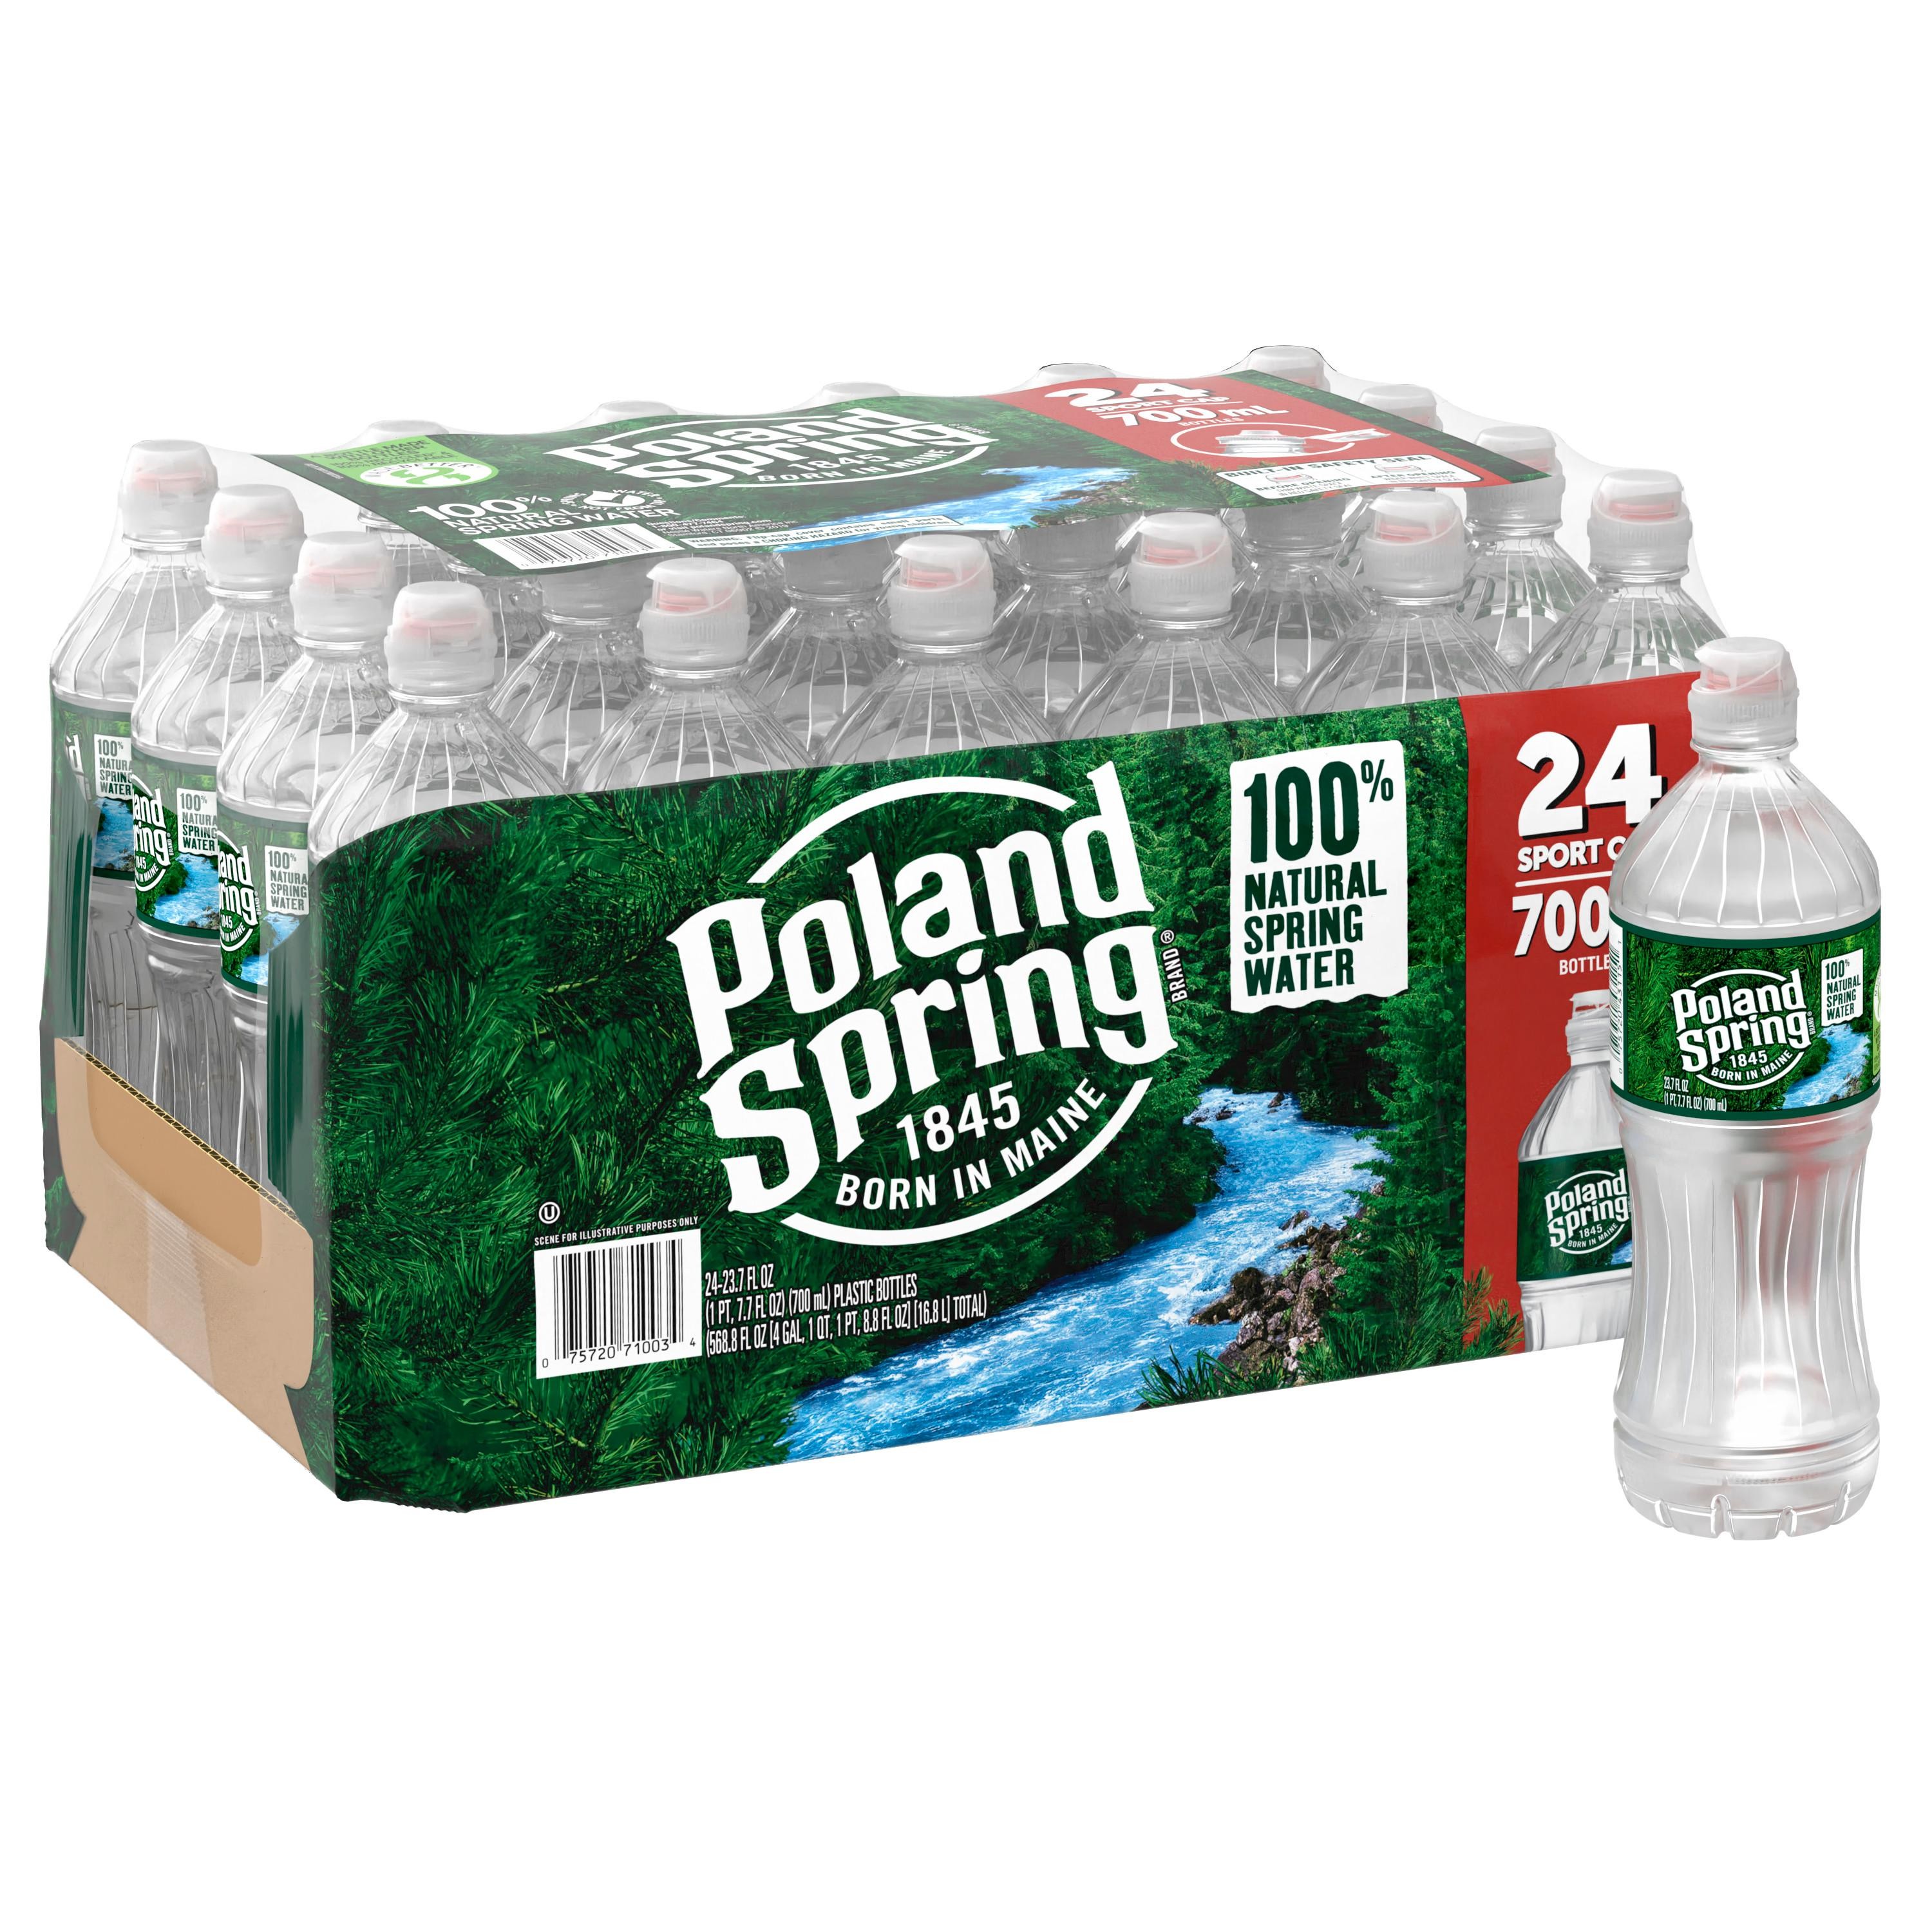 POLAND SPRING Brand 100% Natural Spring Water  23.7-ounce Plastic Bottles (Pack of 24)